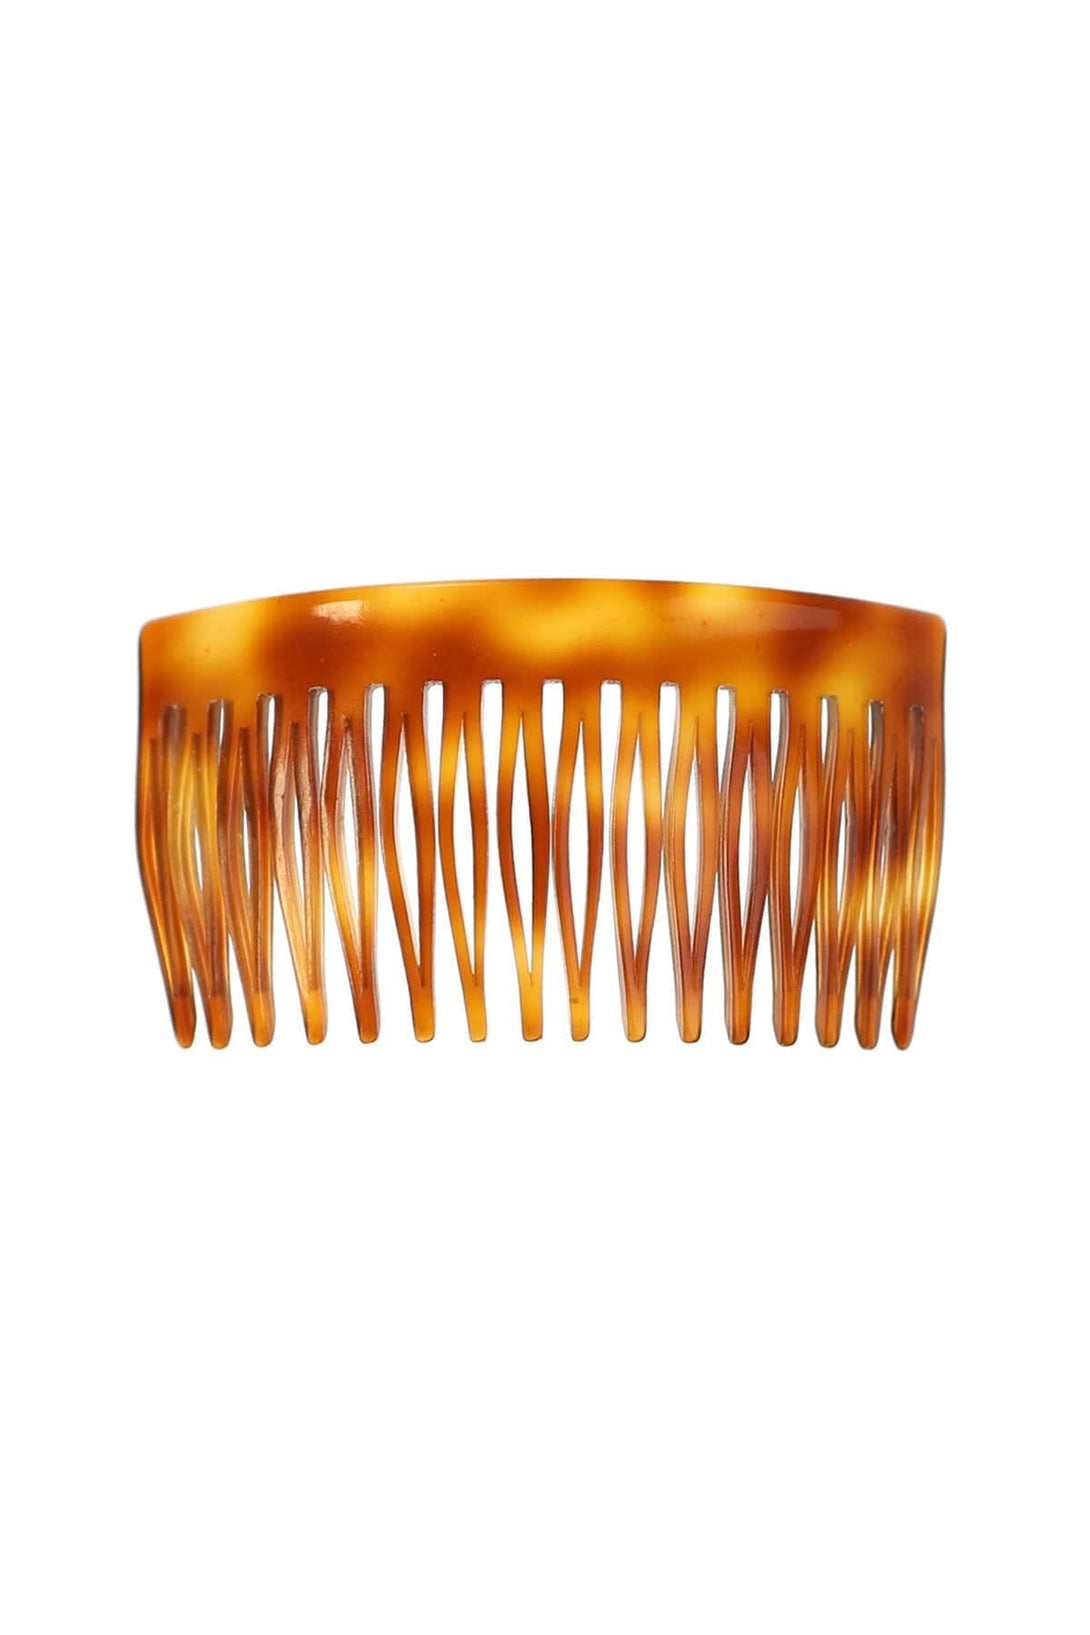 Vintage French Tortoise Shell Curved Hair Comb